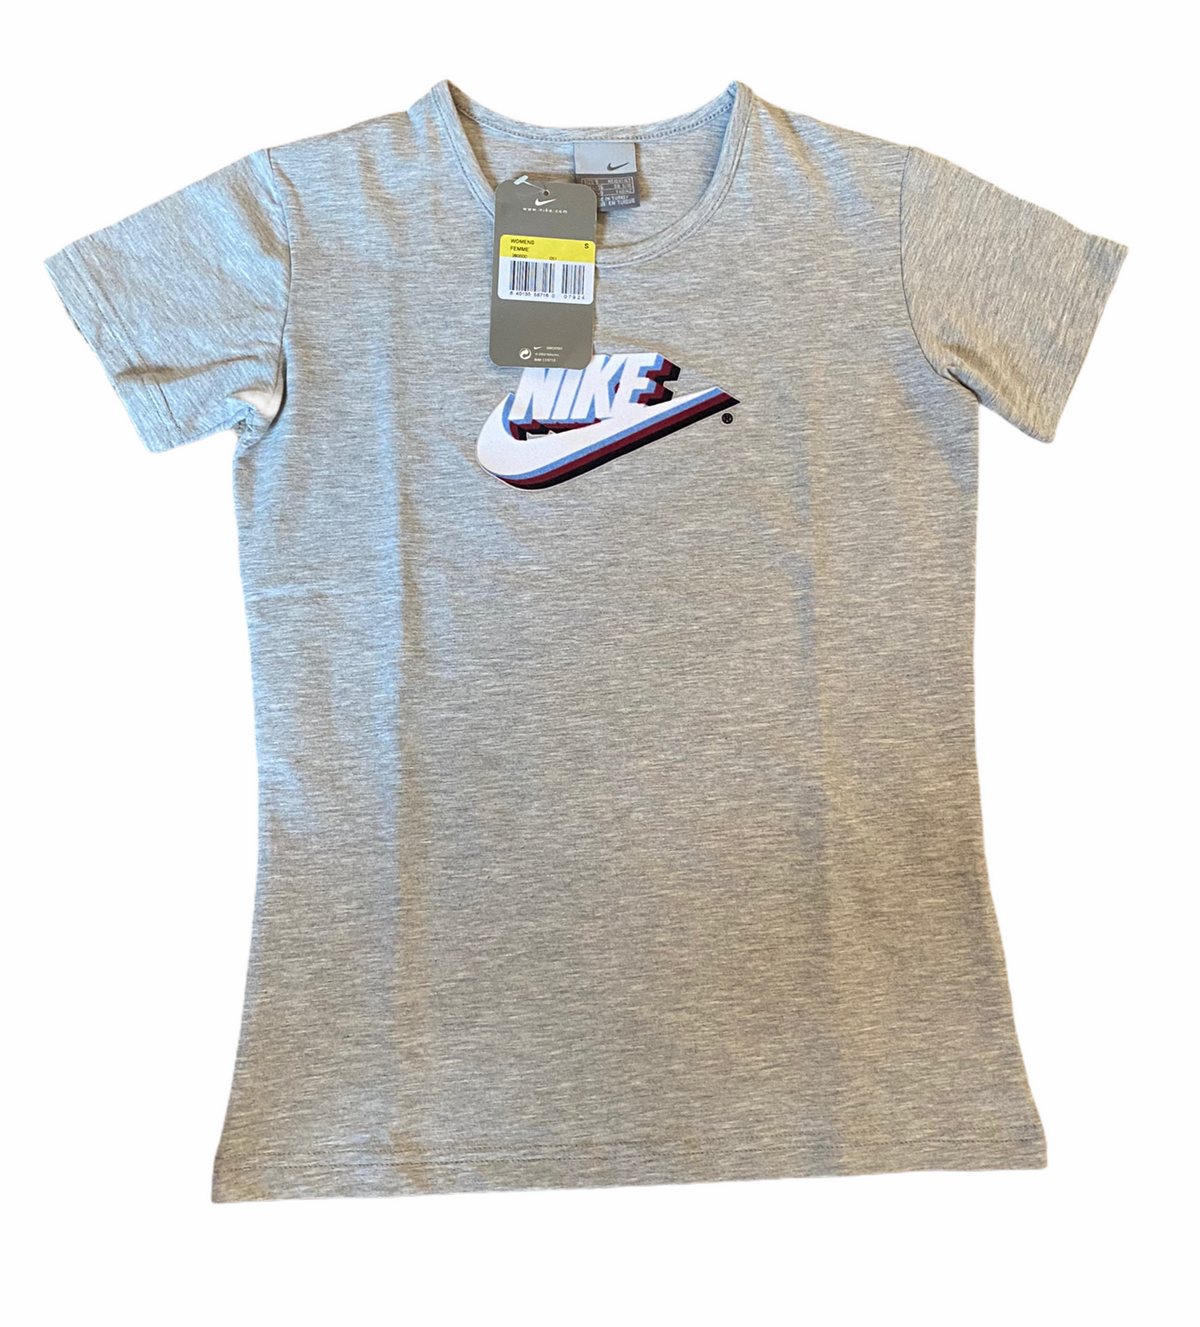 VINTAGE 2002 NIKE SPELLOUT T-SHIRT IN GREY - Not In Your Wardrobe™ - [Vendor]